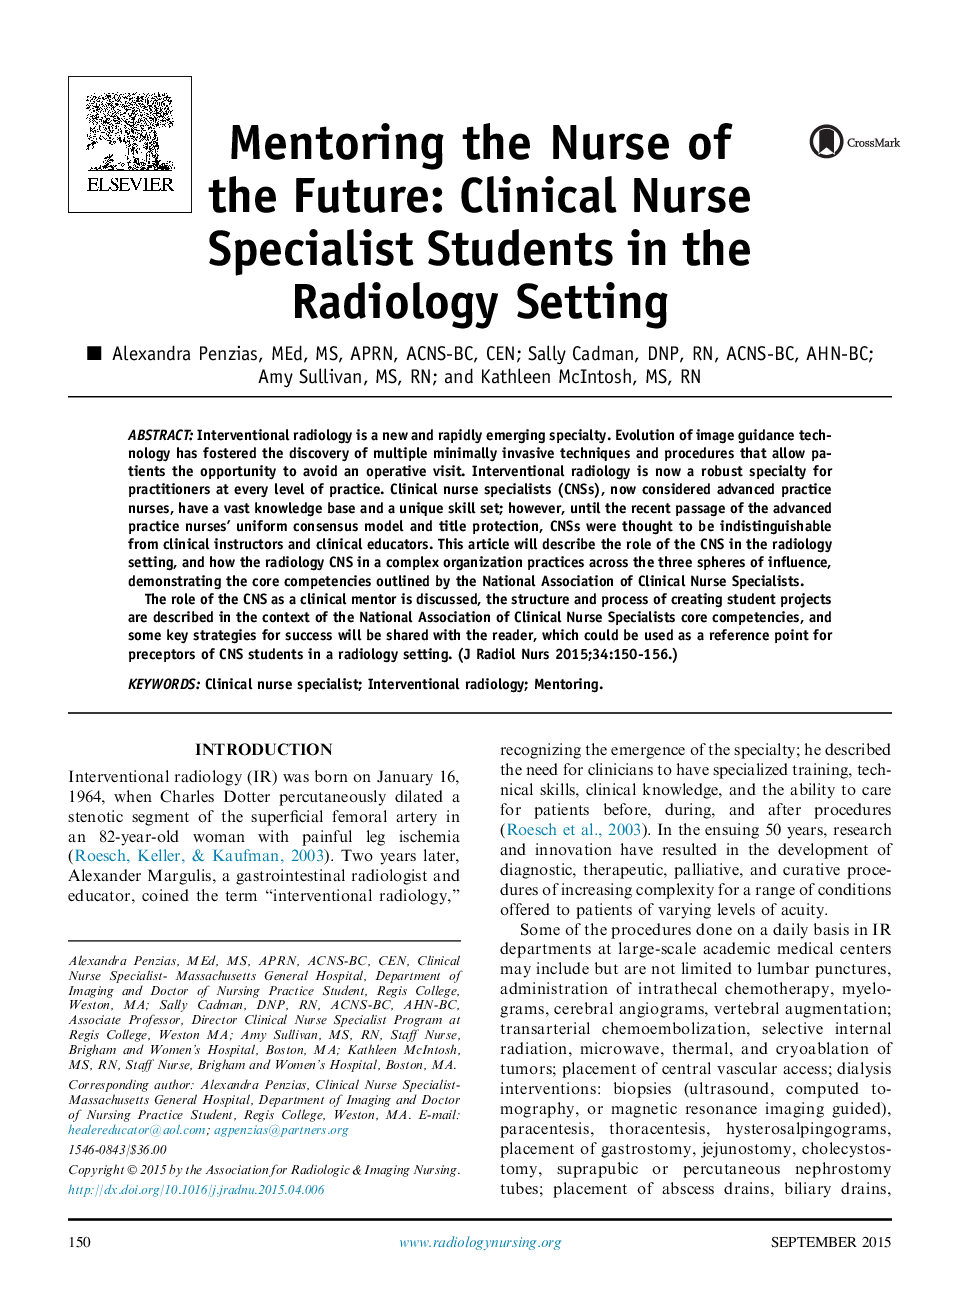 Mentoring the Nurse of the Future: Clinical Nurse Specialist Students in the Radiology Setting